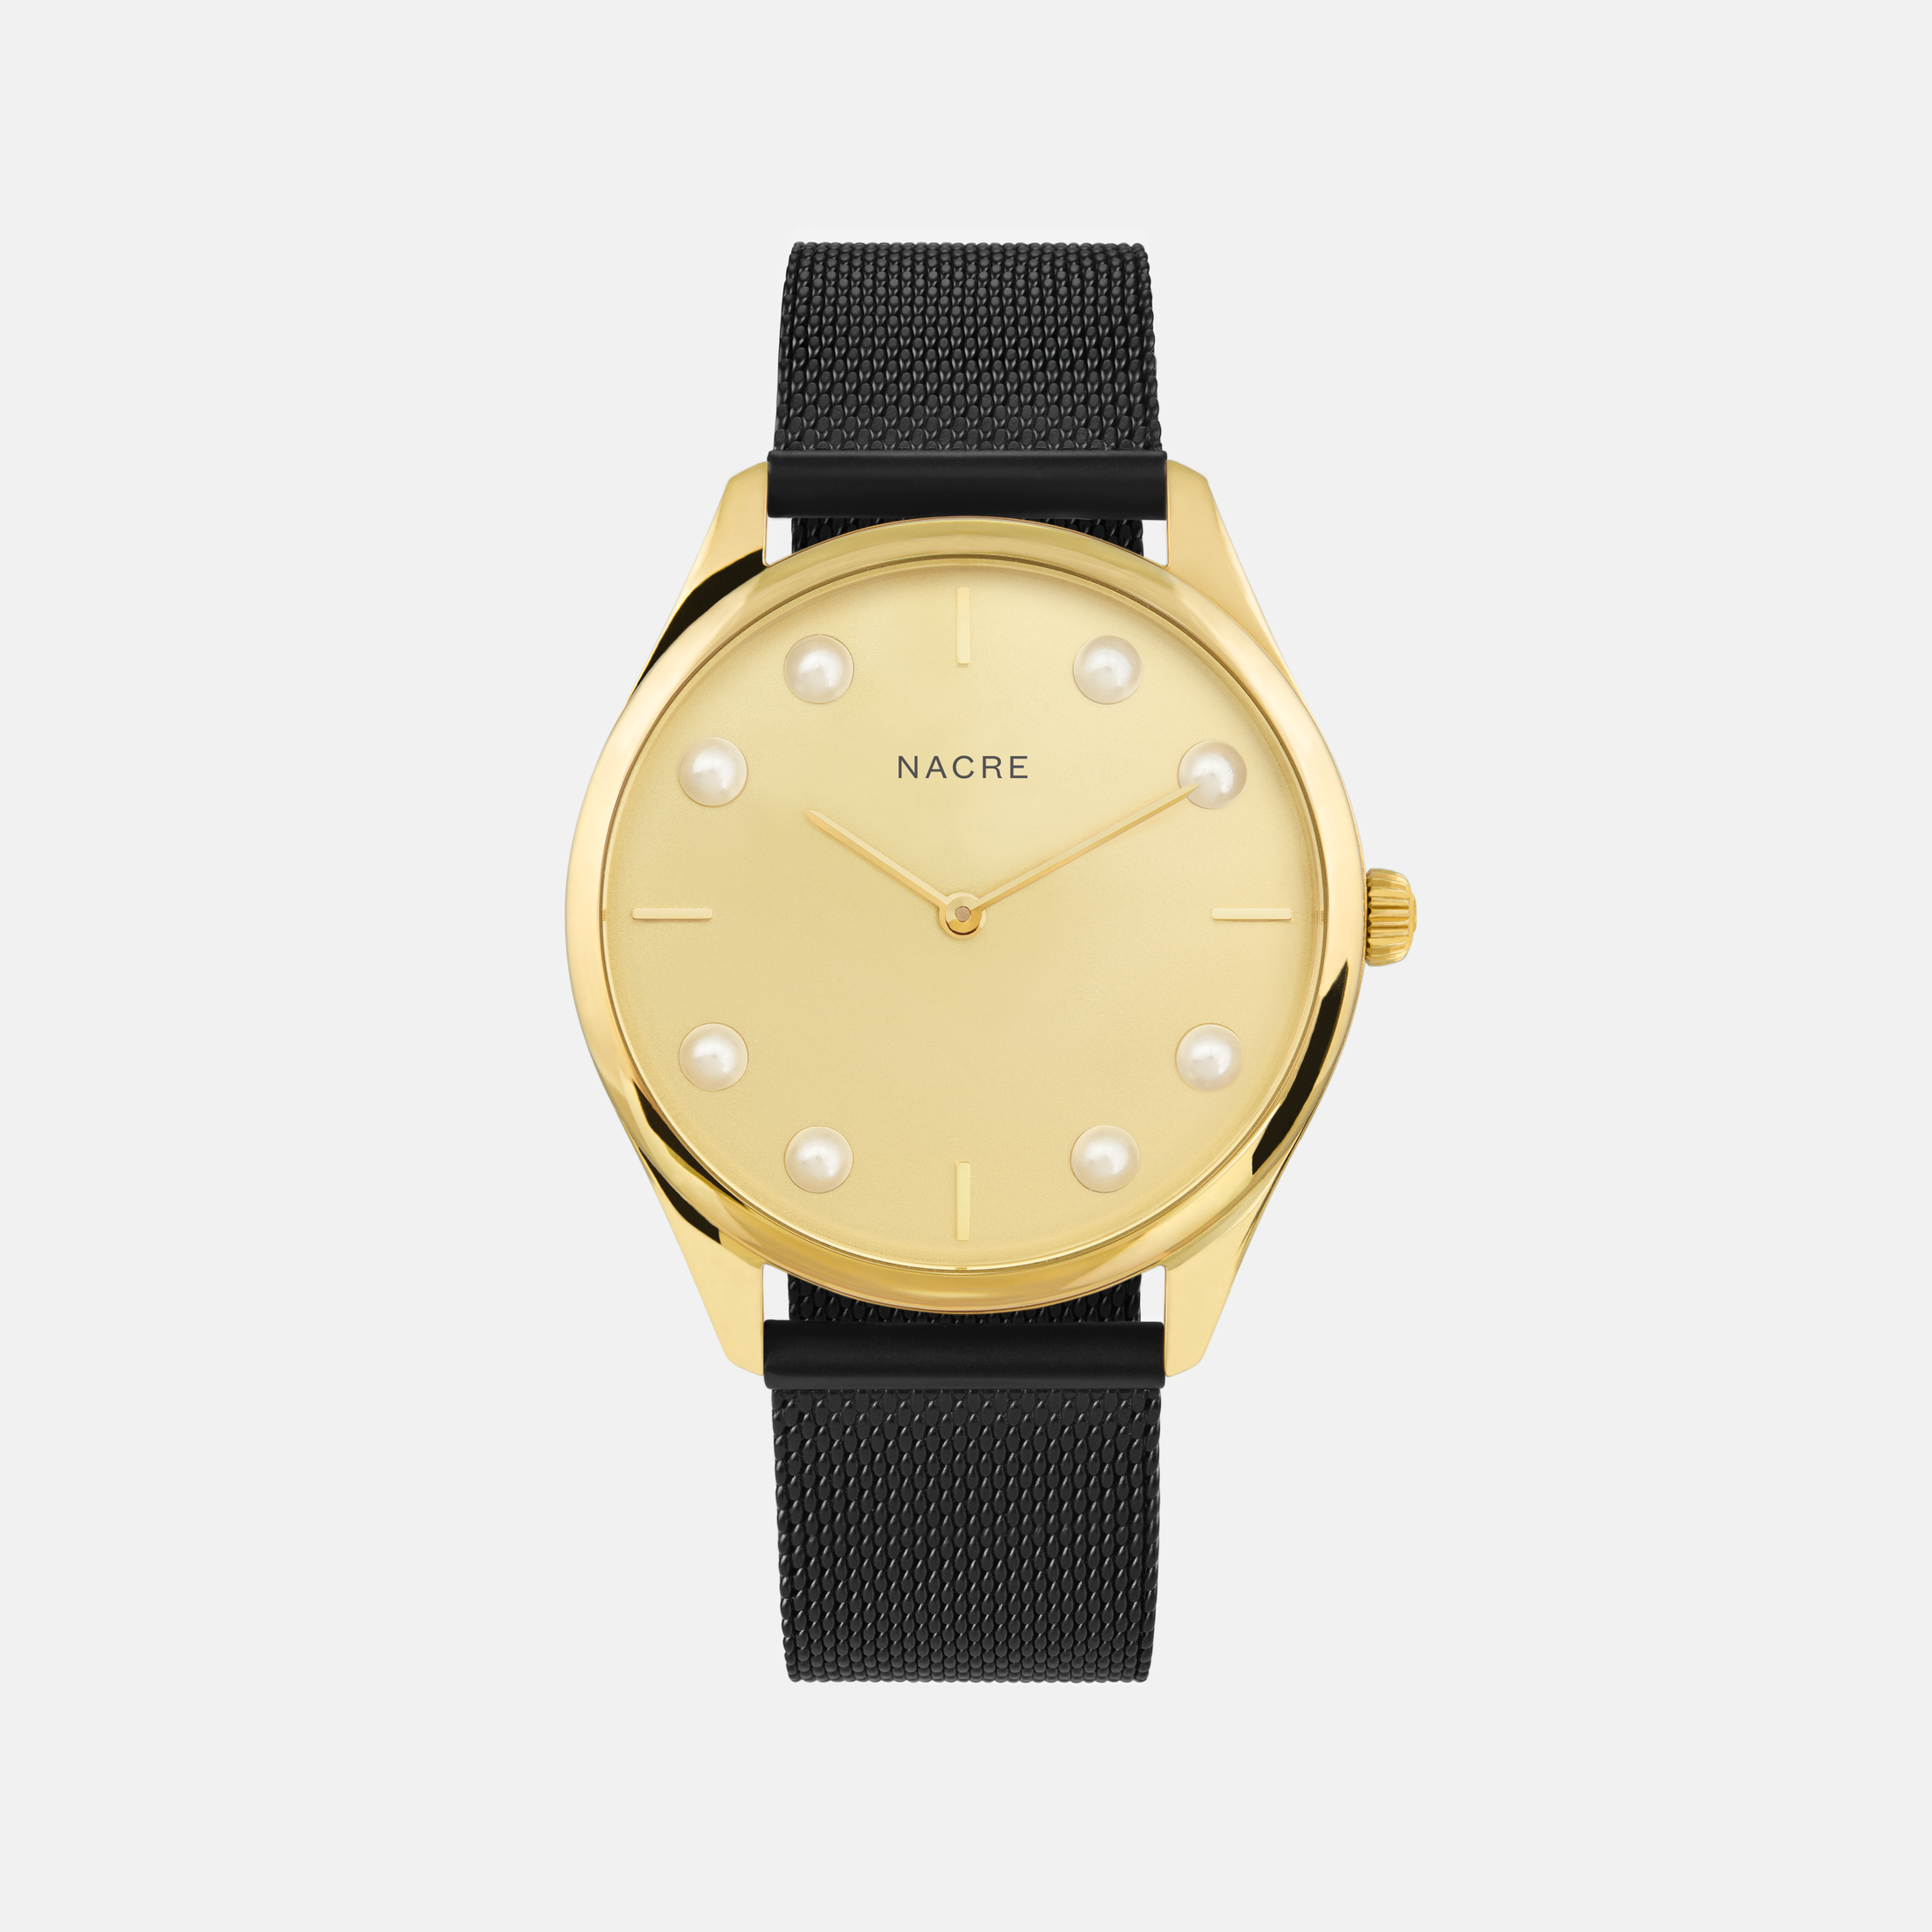 Lune 8 - Gold - Sand Leather